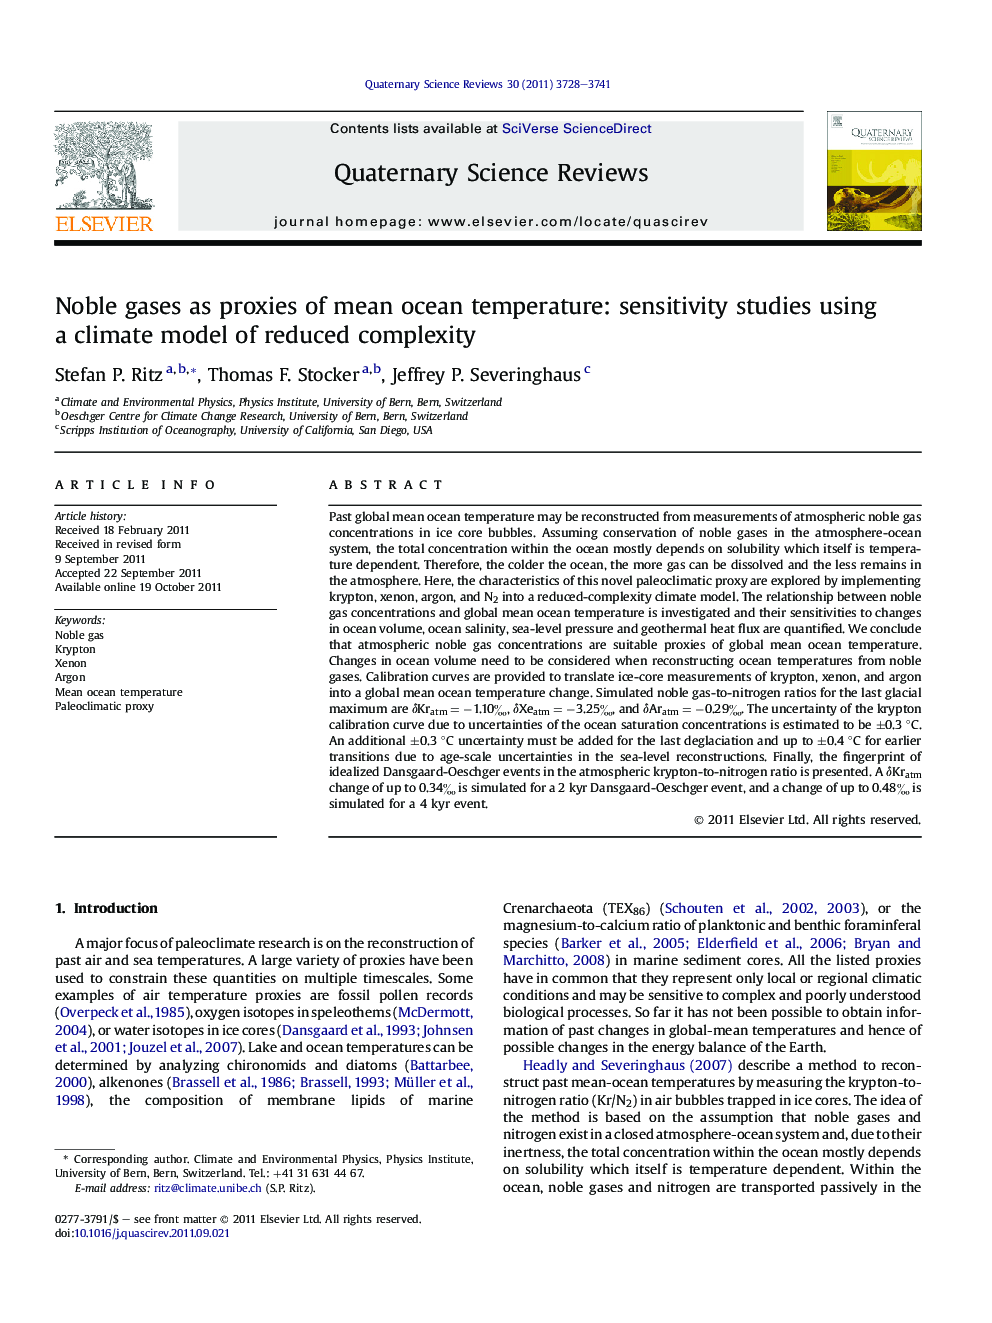 Noble gases as proxies of mean ocean temperature: sensitivity studies using a climate model of reduced complexity